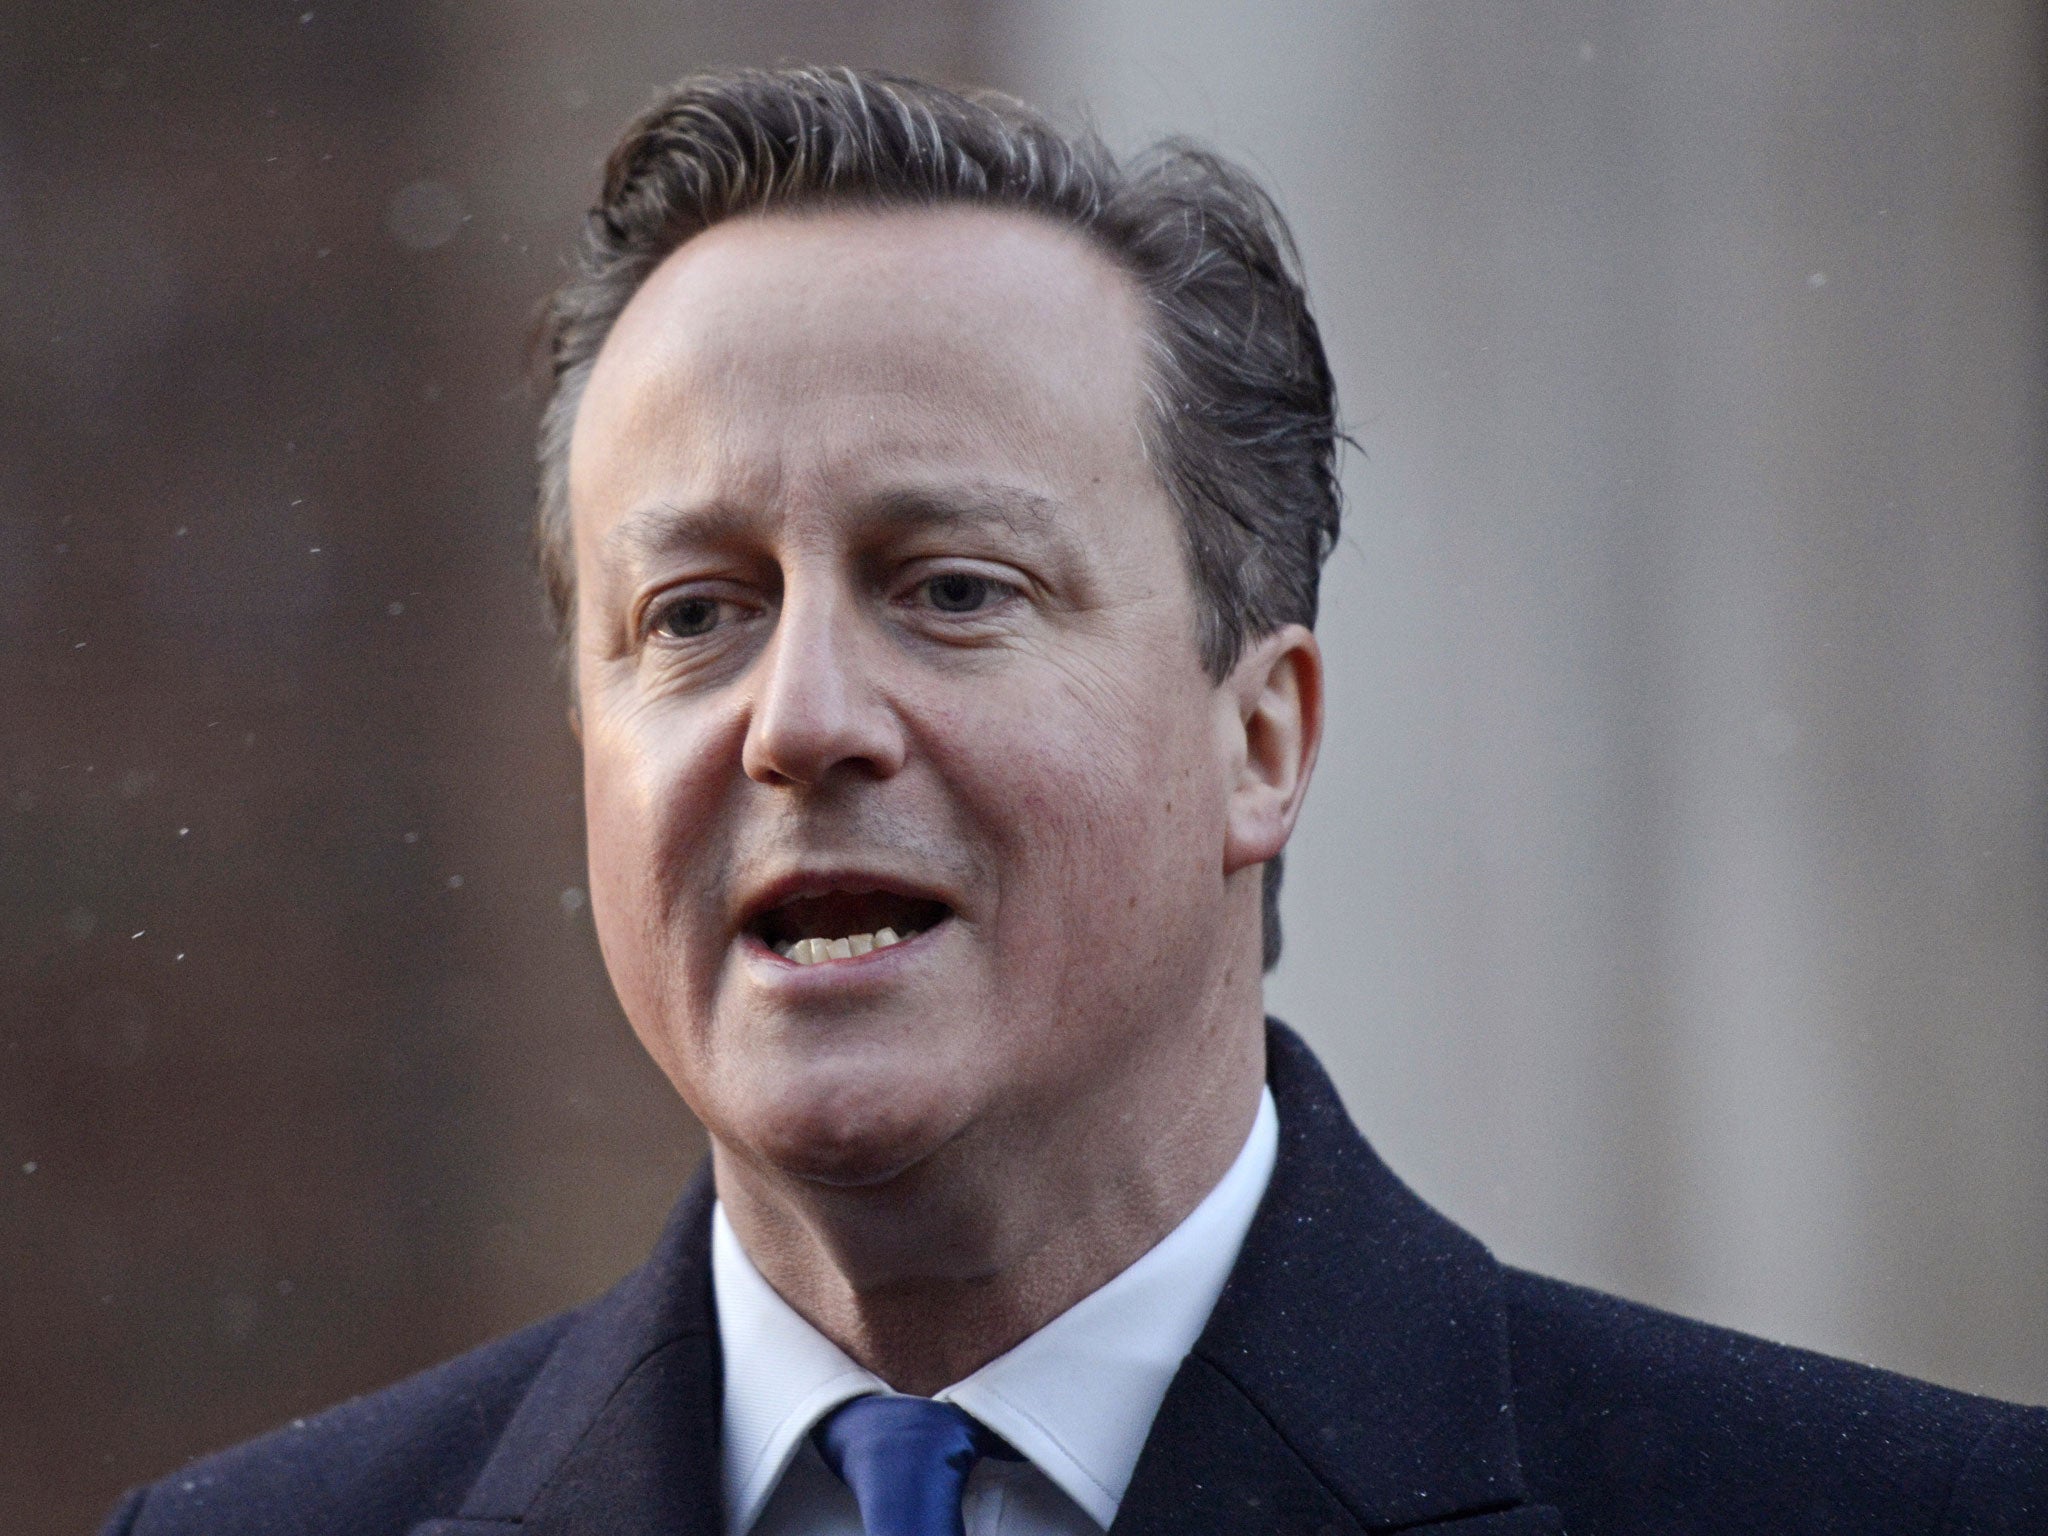 David Cameron says he is still a “compassionate Conservative” (Getty Images)